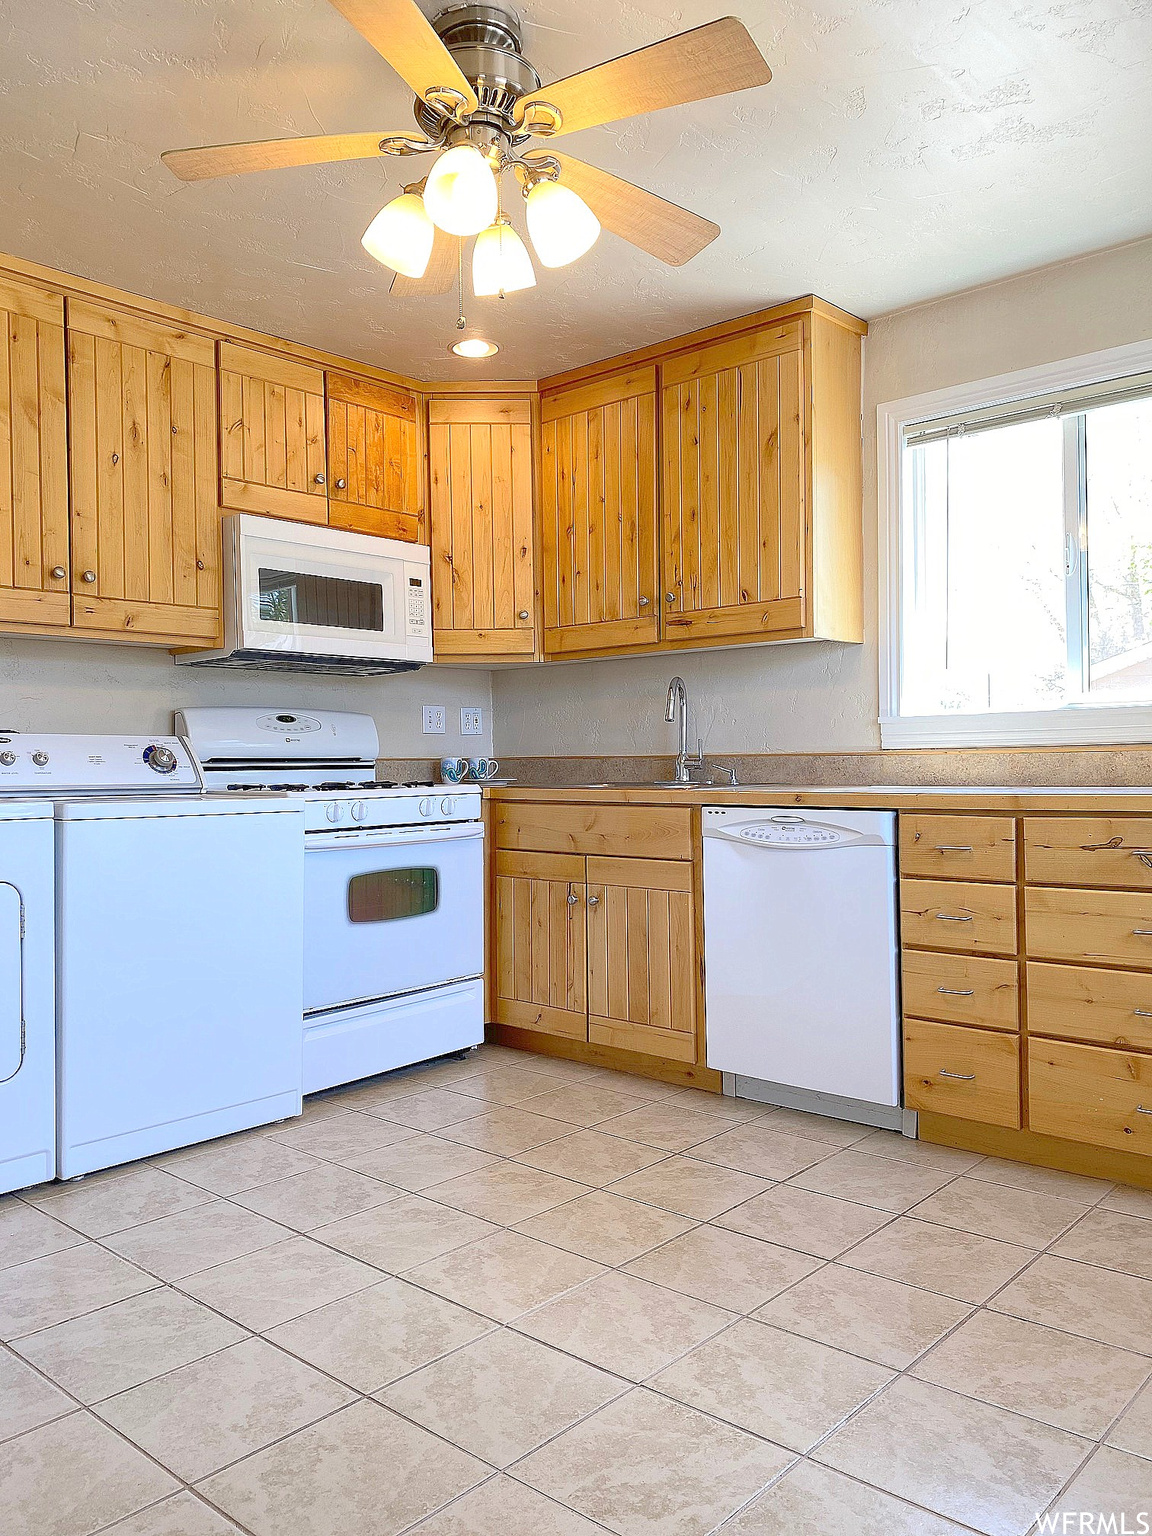 Kitchen featuring white appliances, washing machine and dryer, light tile floors, and ceiling fan